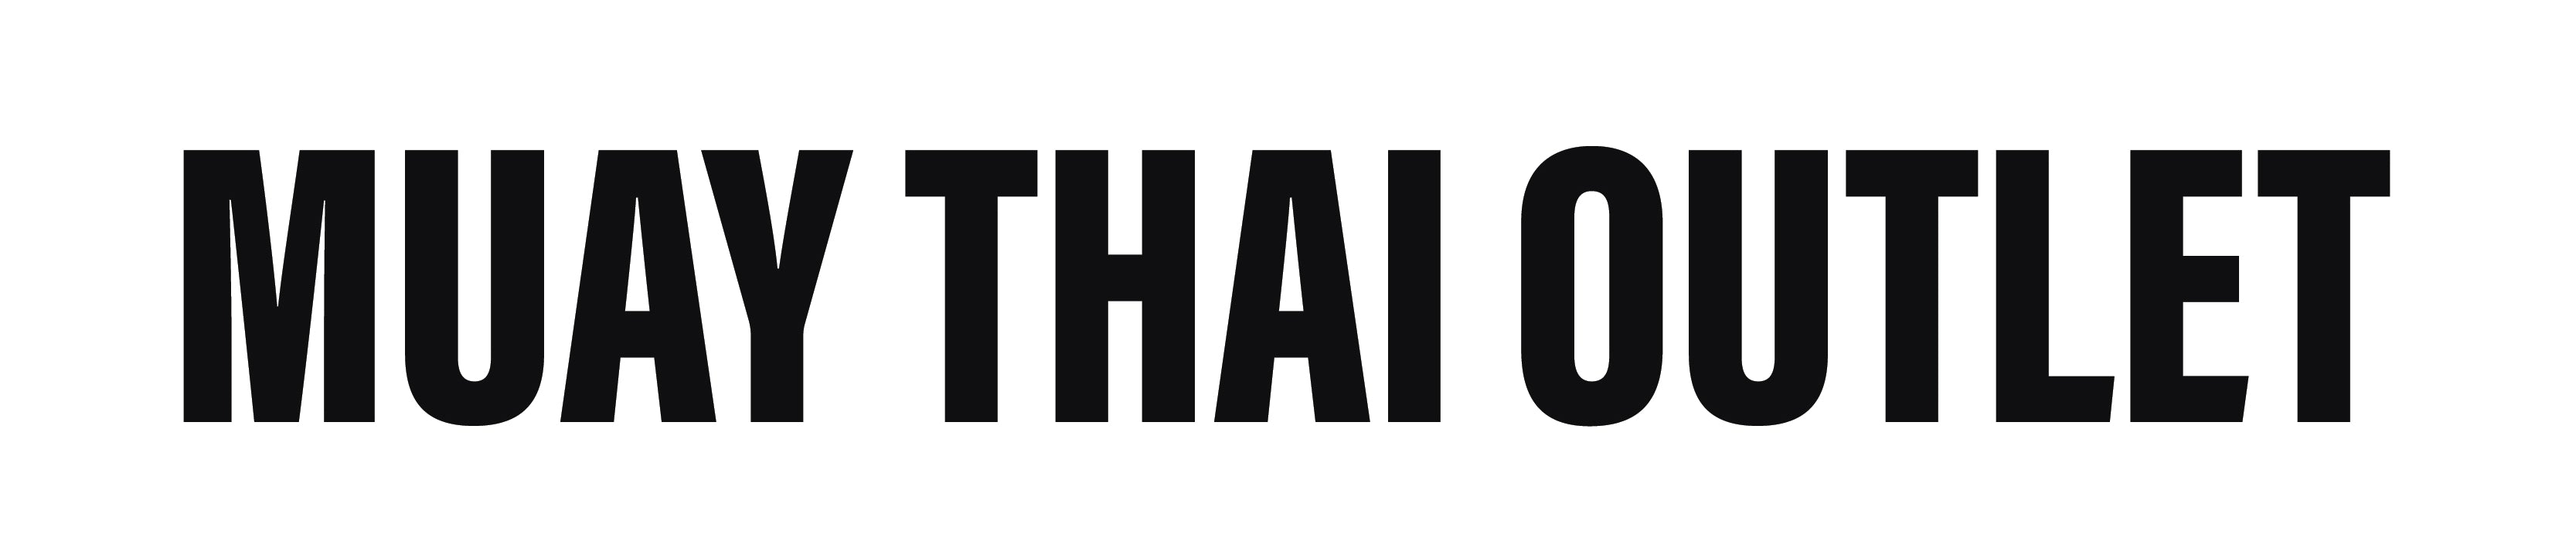 MUAY THAI OUTLET